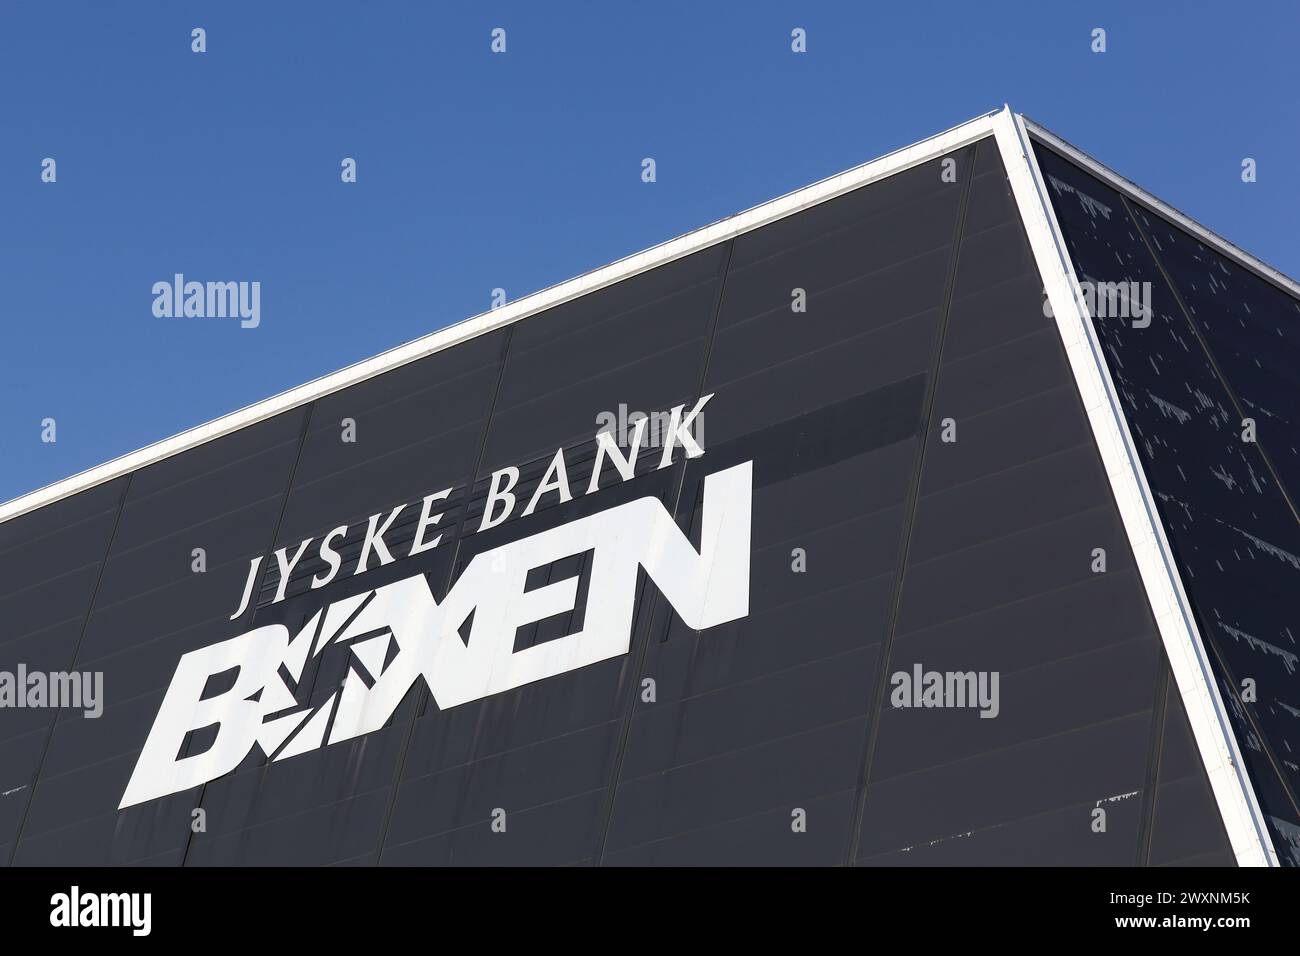 Herning, Denmark - May 13, 2018: Jyske Bank Boxen sign on a building. Jyske Bank Boxen is an indoor arena, located in Herning, Denmark Stock Photo